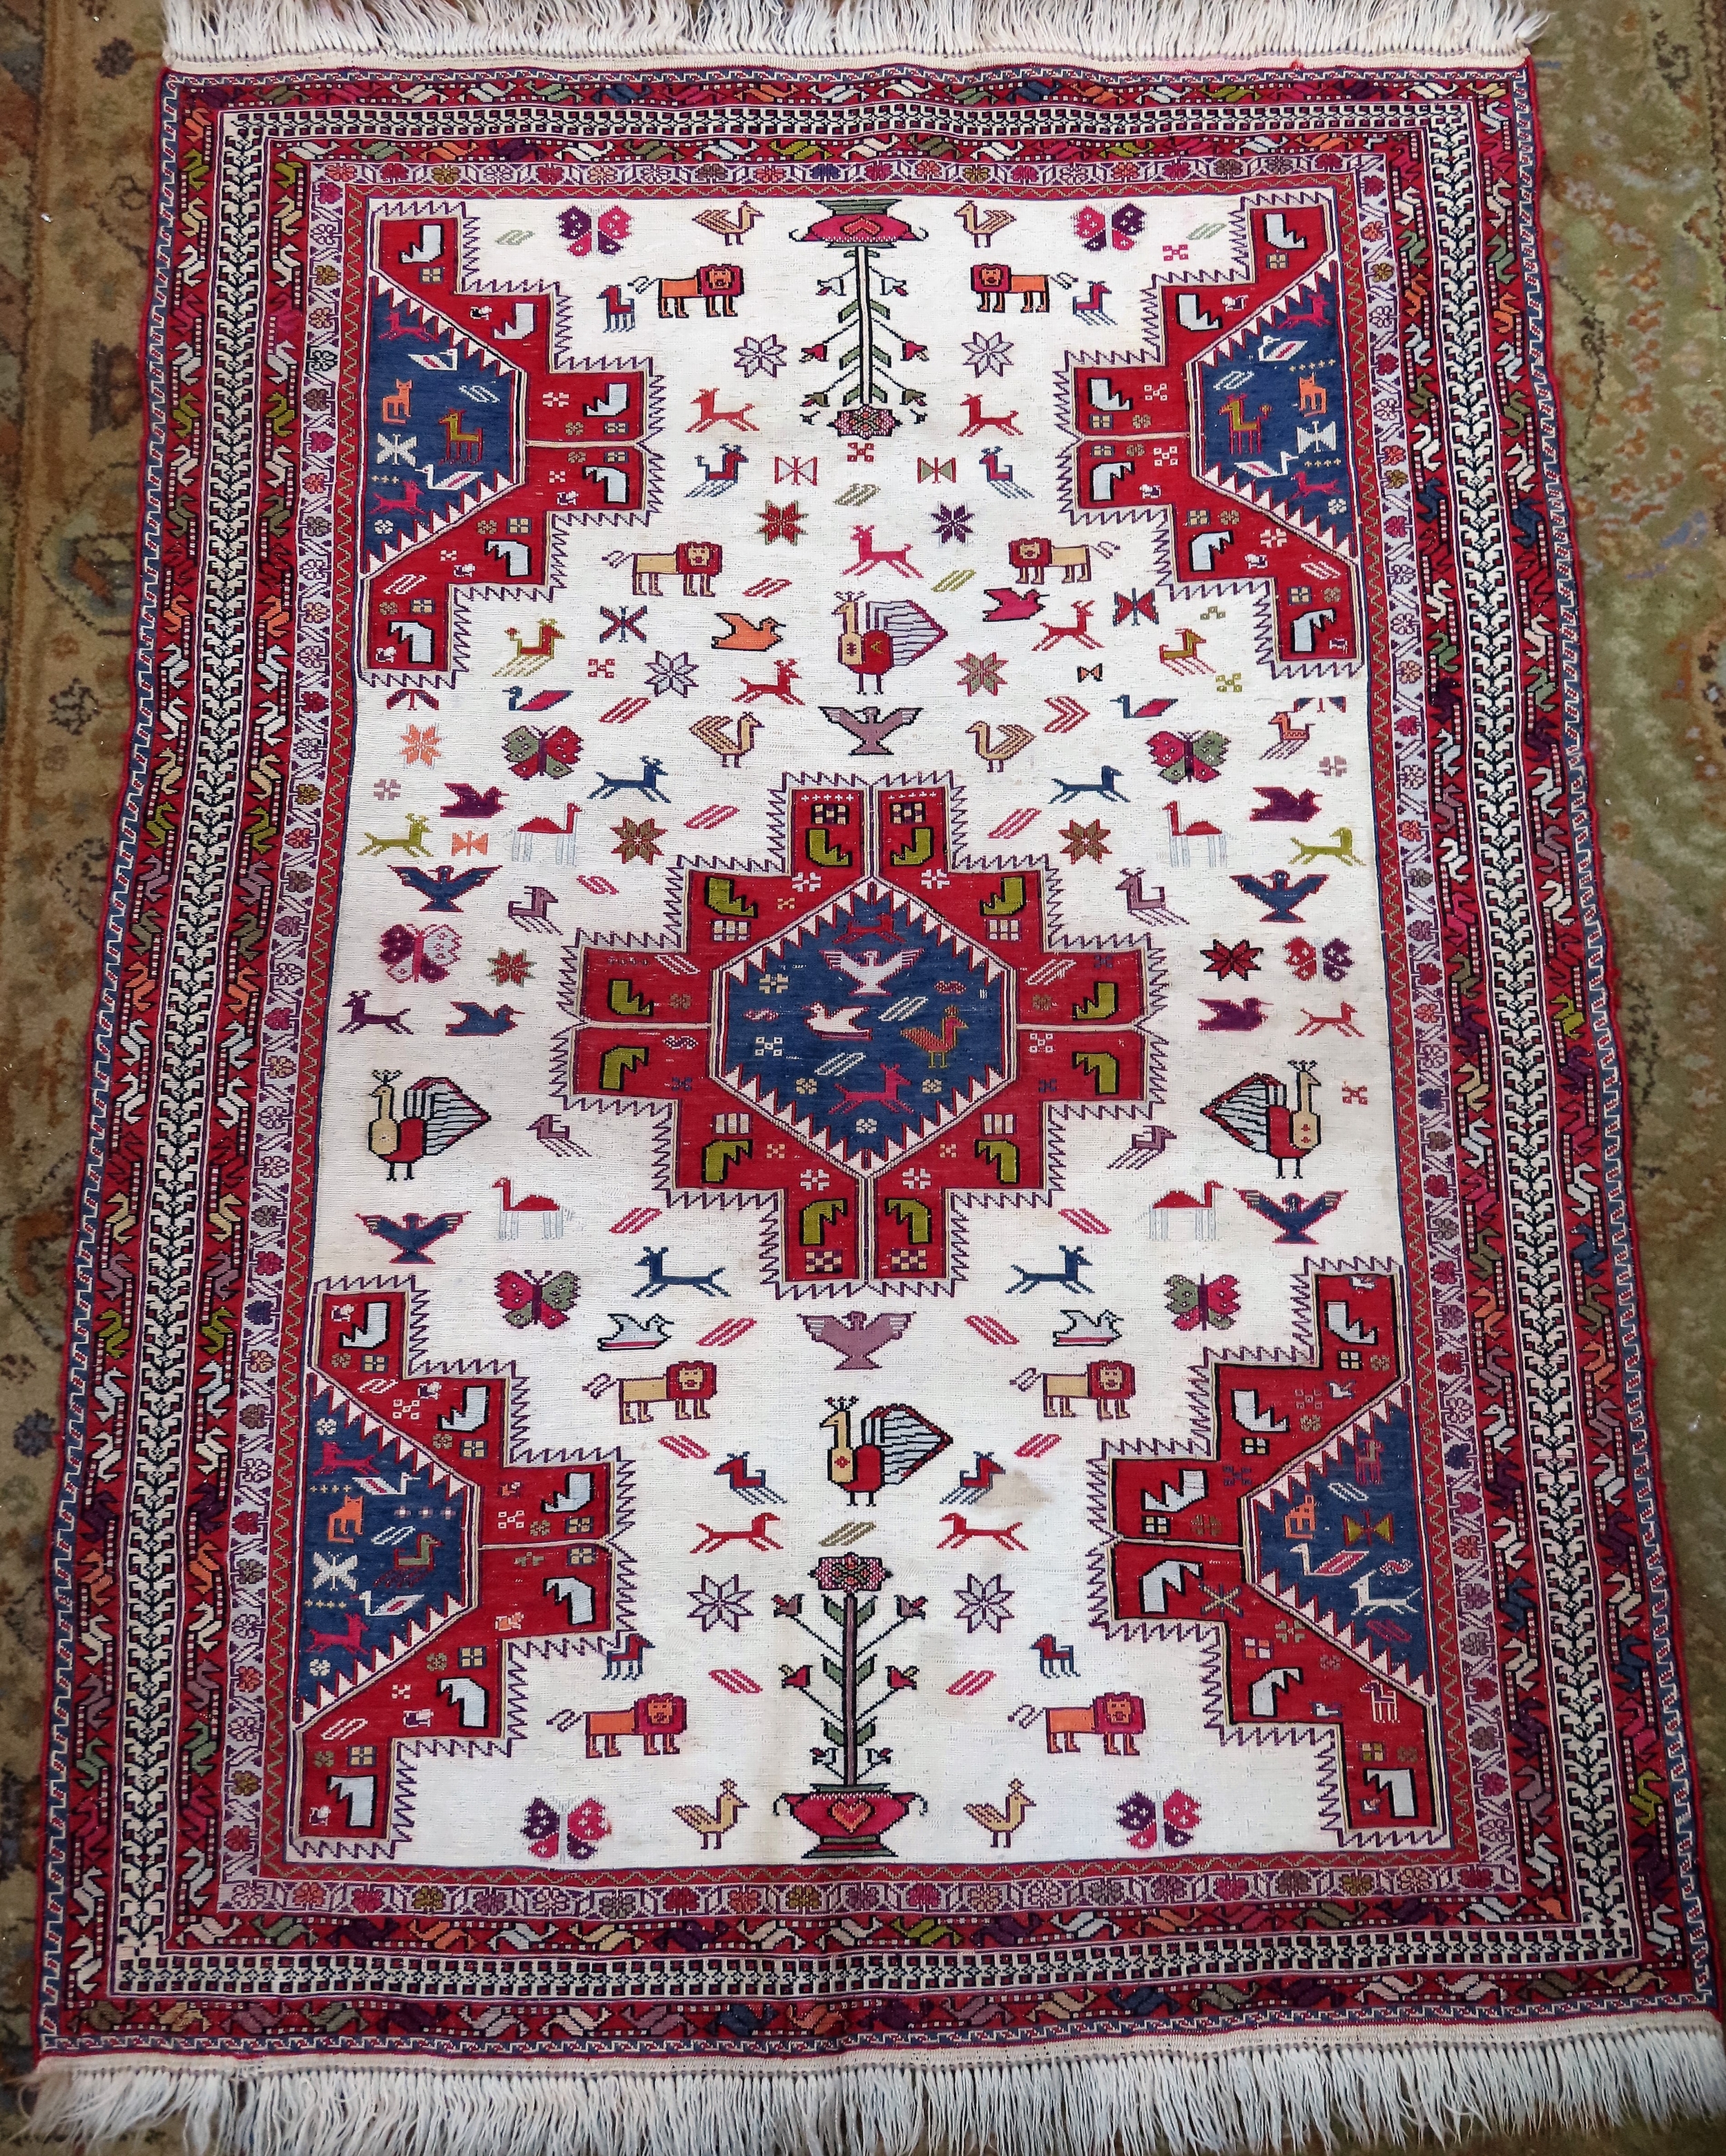 Vintage hand knotted Persian Kilim floor rug. Approx. 150cms x 112cms appears in reasonable used